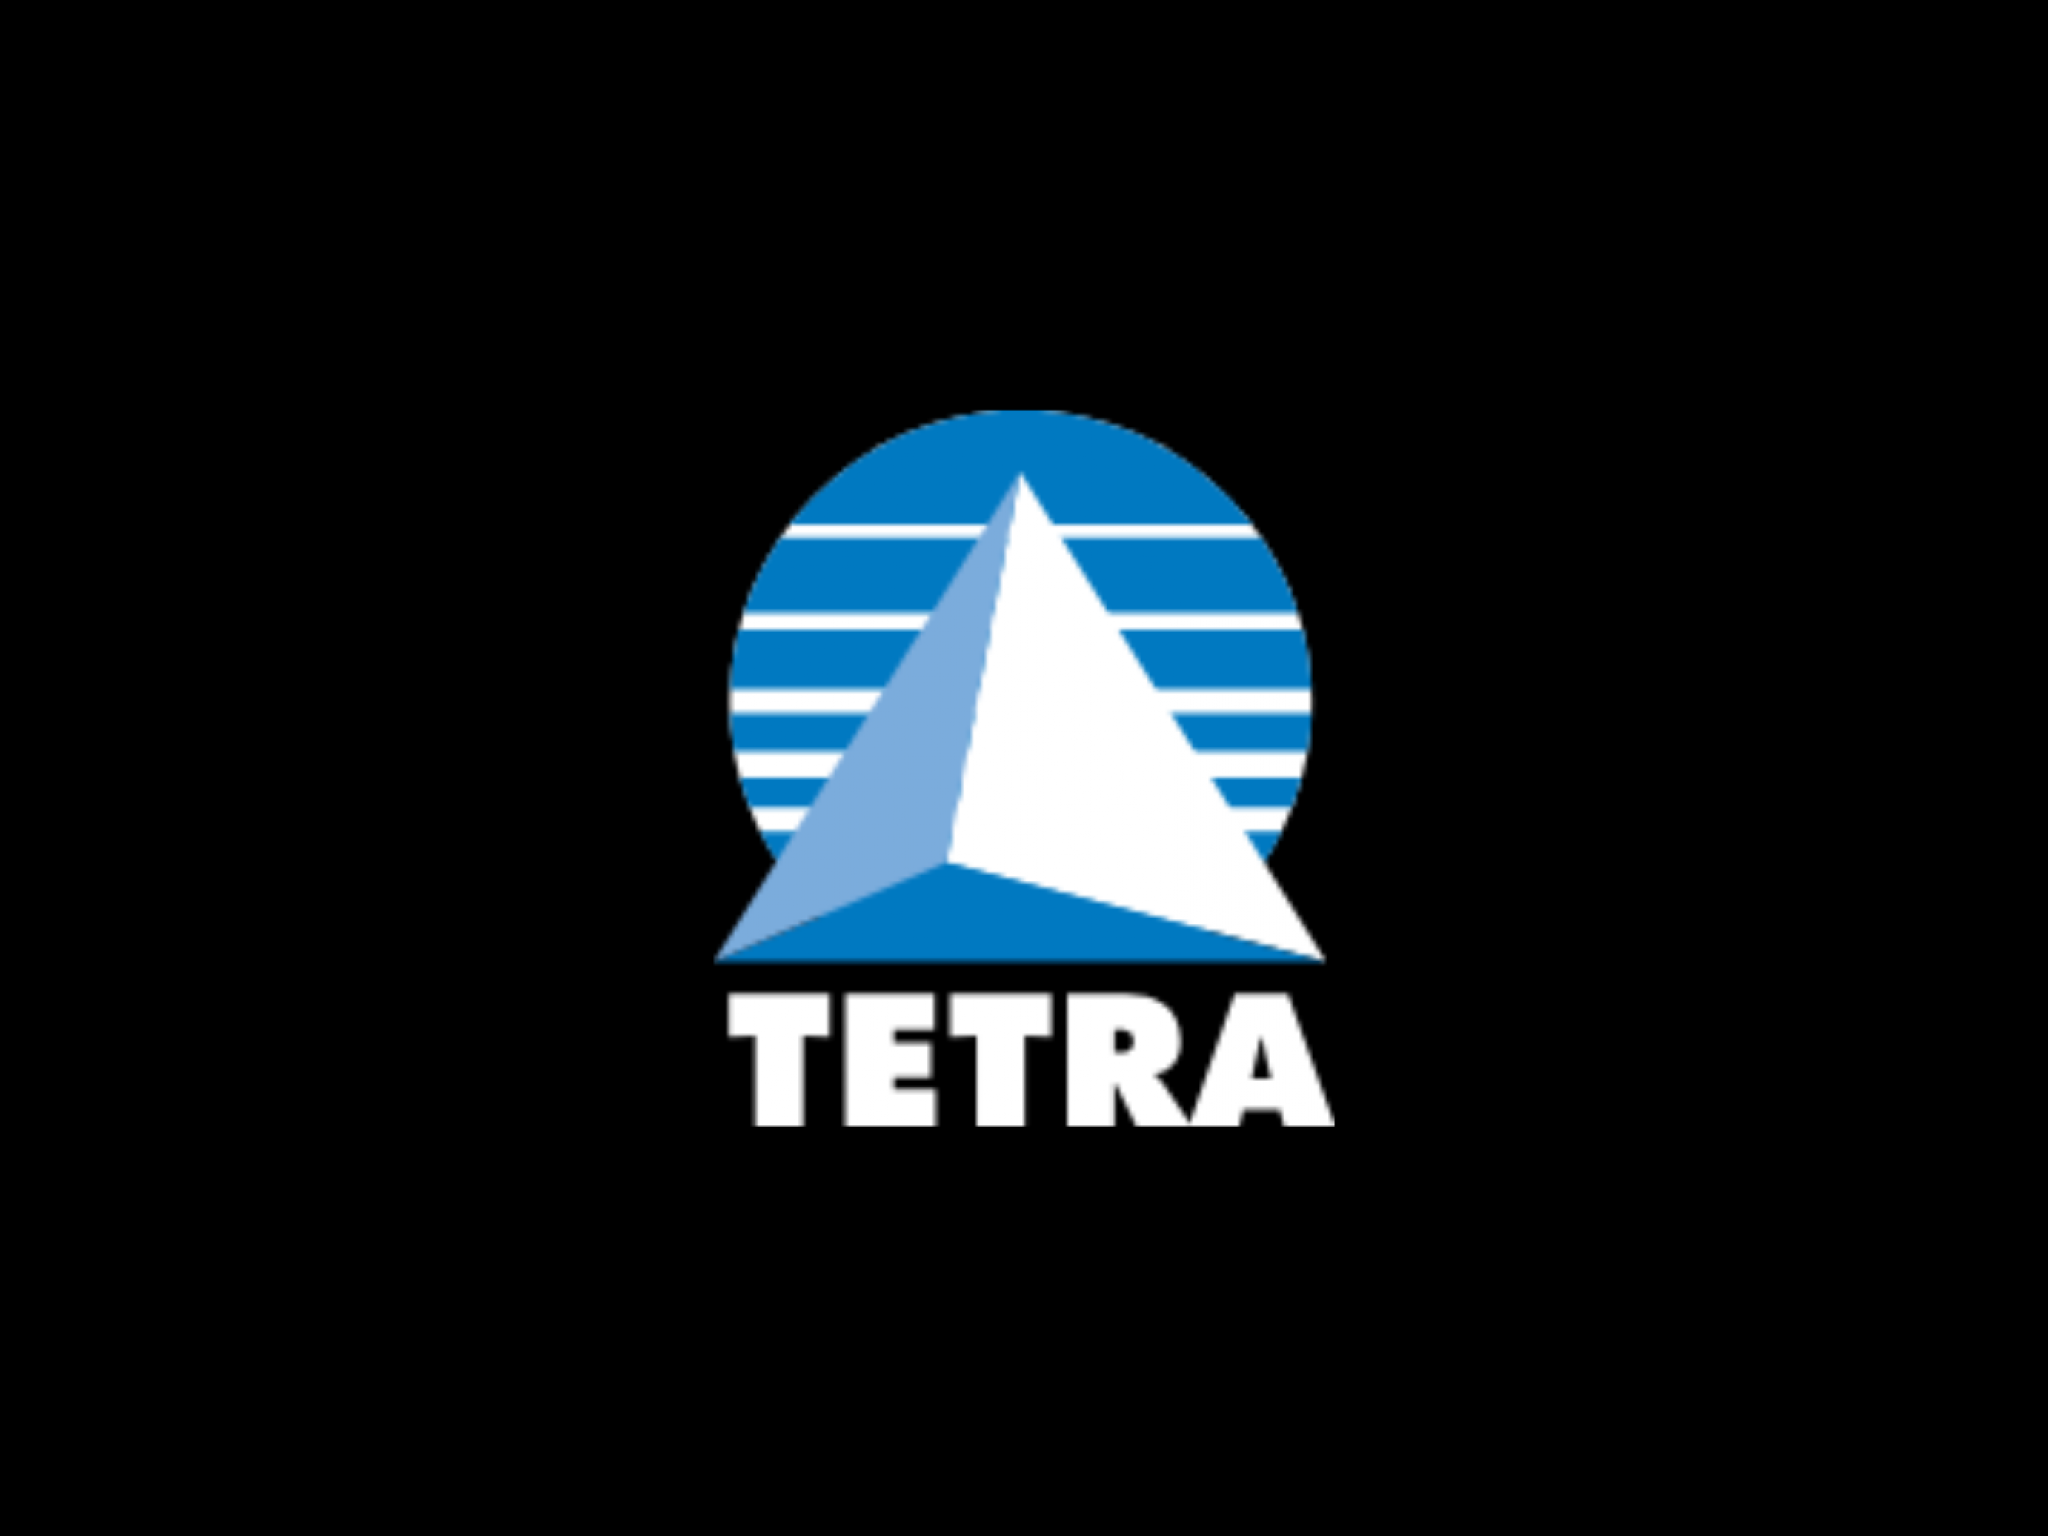  tetras-diversified-future-lithium-zinc-bromide-and-water-recycling-poised-to-reshape-earnings-highlights-analyst 